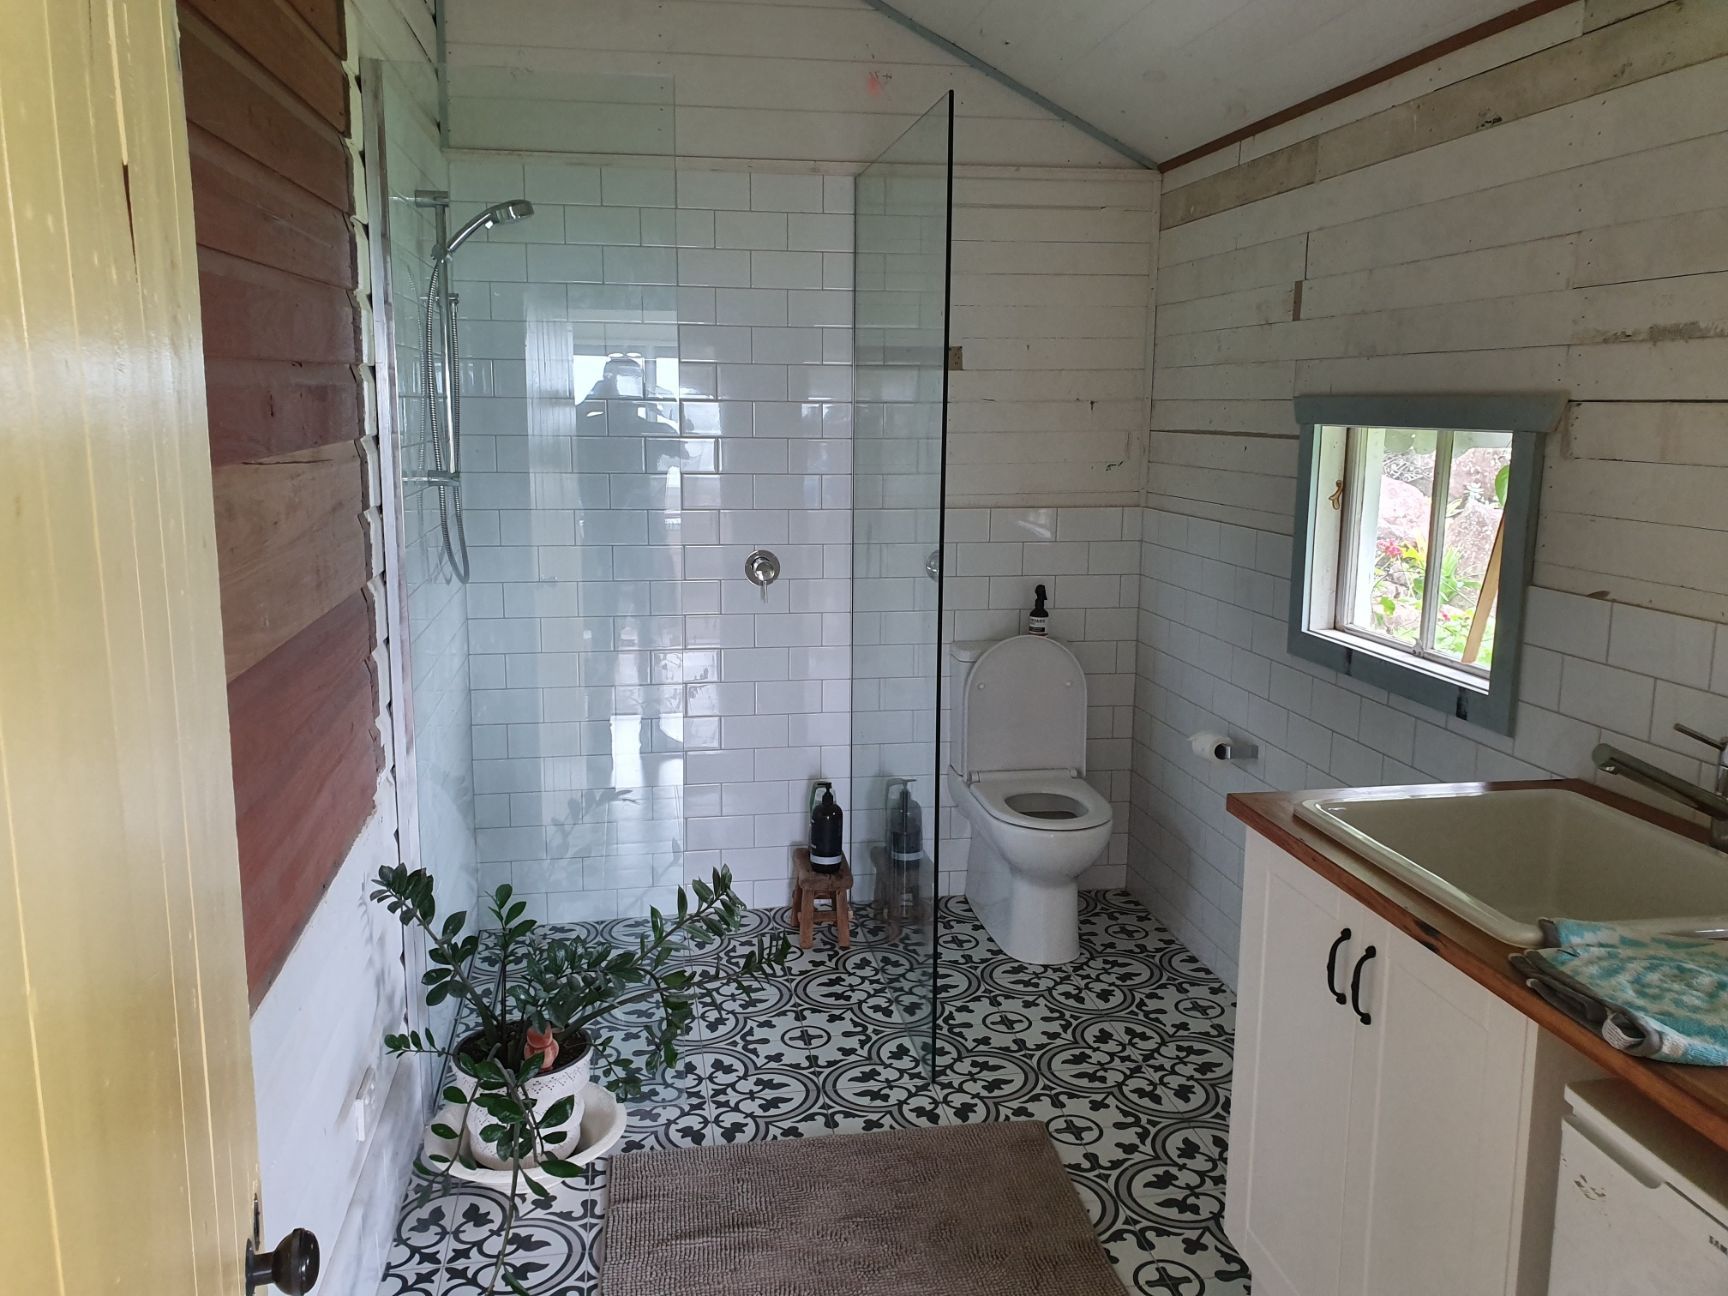 Shower Room And Bathroom — Builder in Mcleans Ridges, NSW